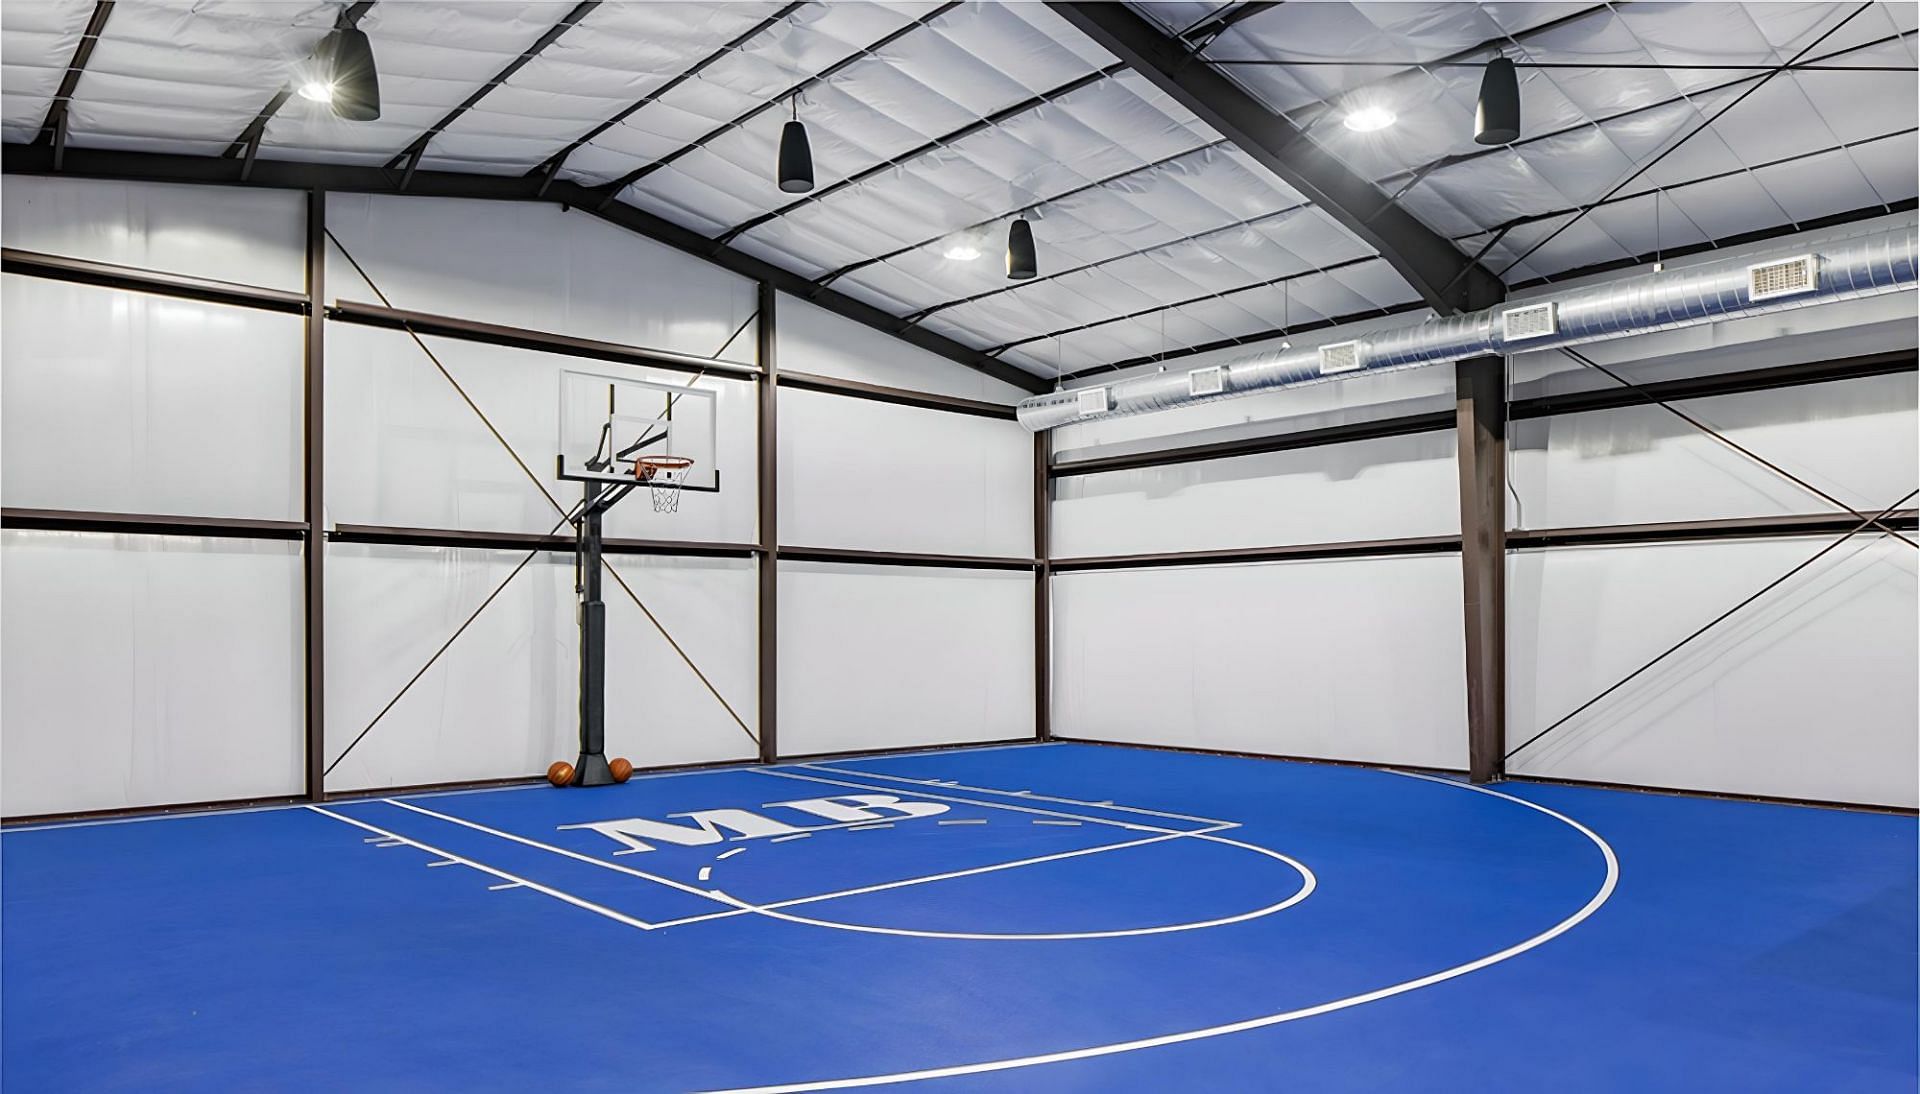 Mookie Betts &#039; personalized basketball court at his listed $8.5 million property (image via Robb Report)